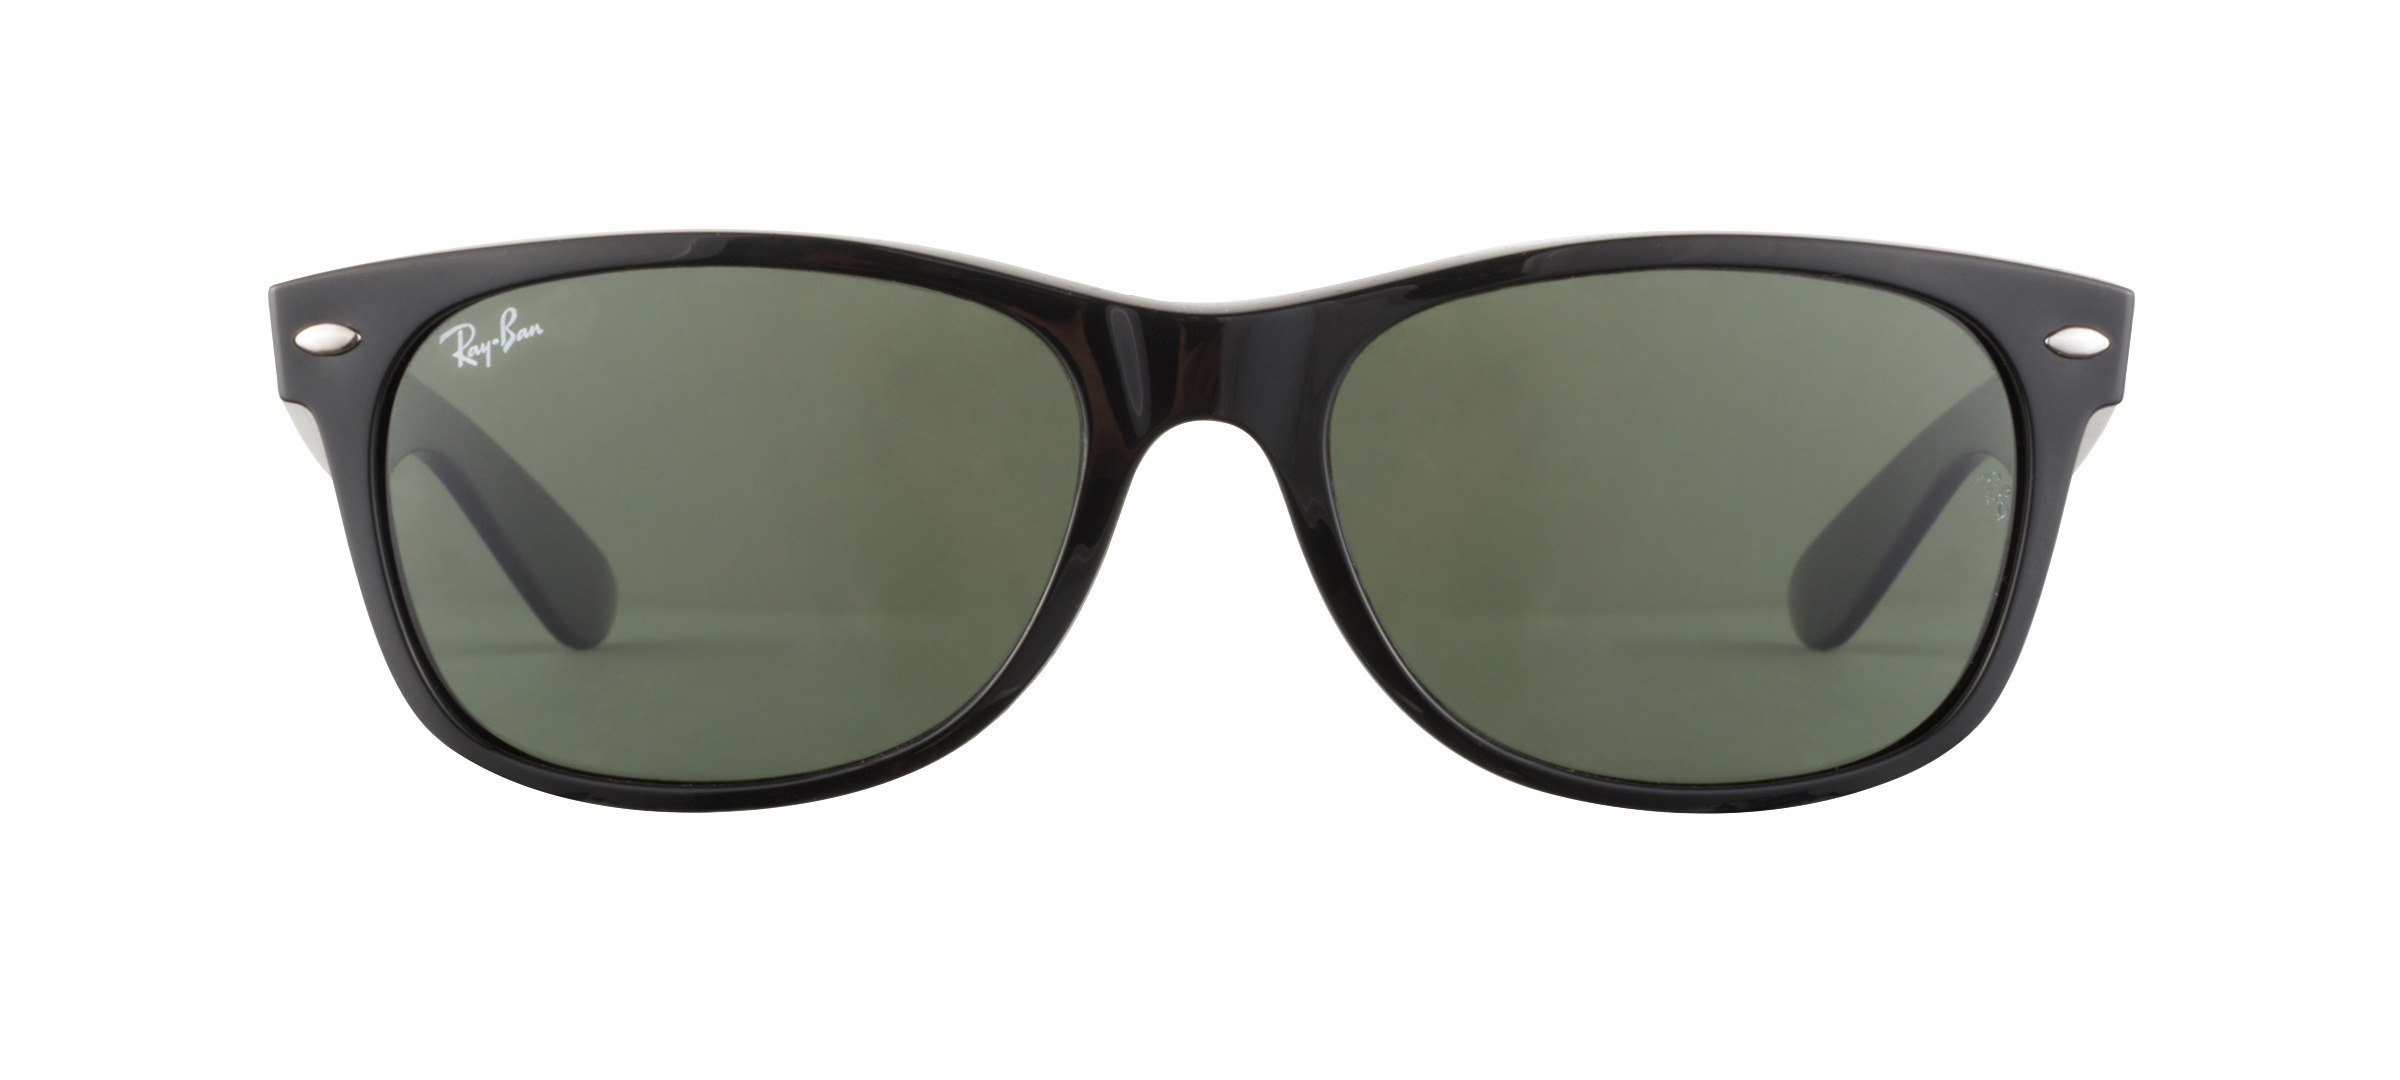 Ray-Ban Sunglasses | Clearly New Zealand Sunglasses for Men & Women |  Clearly